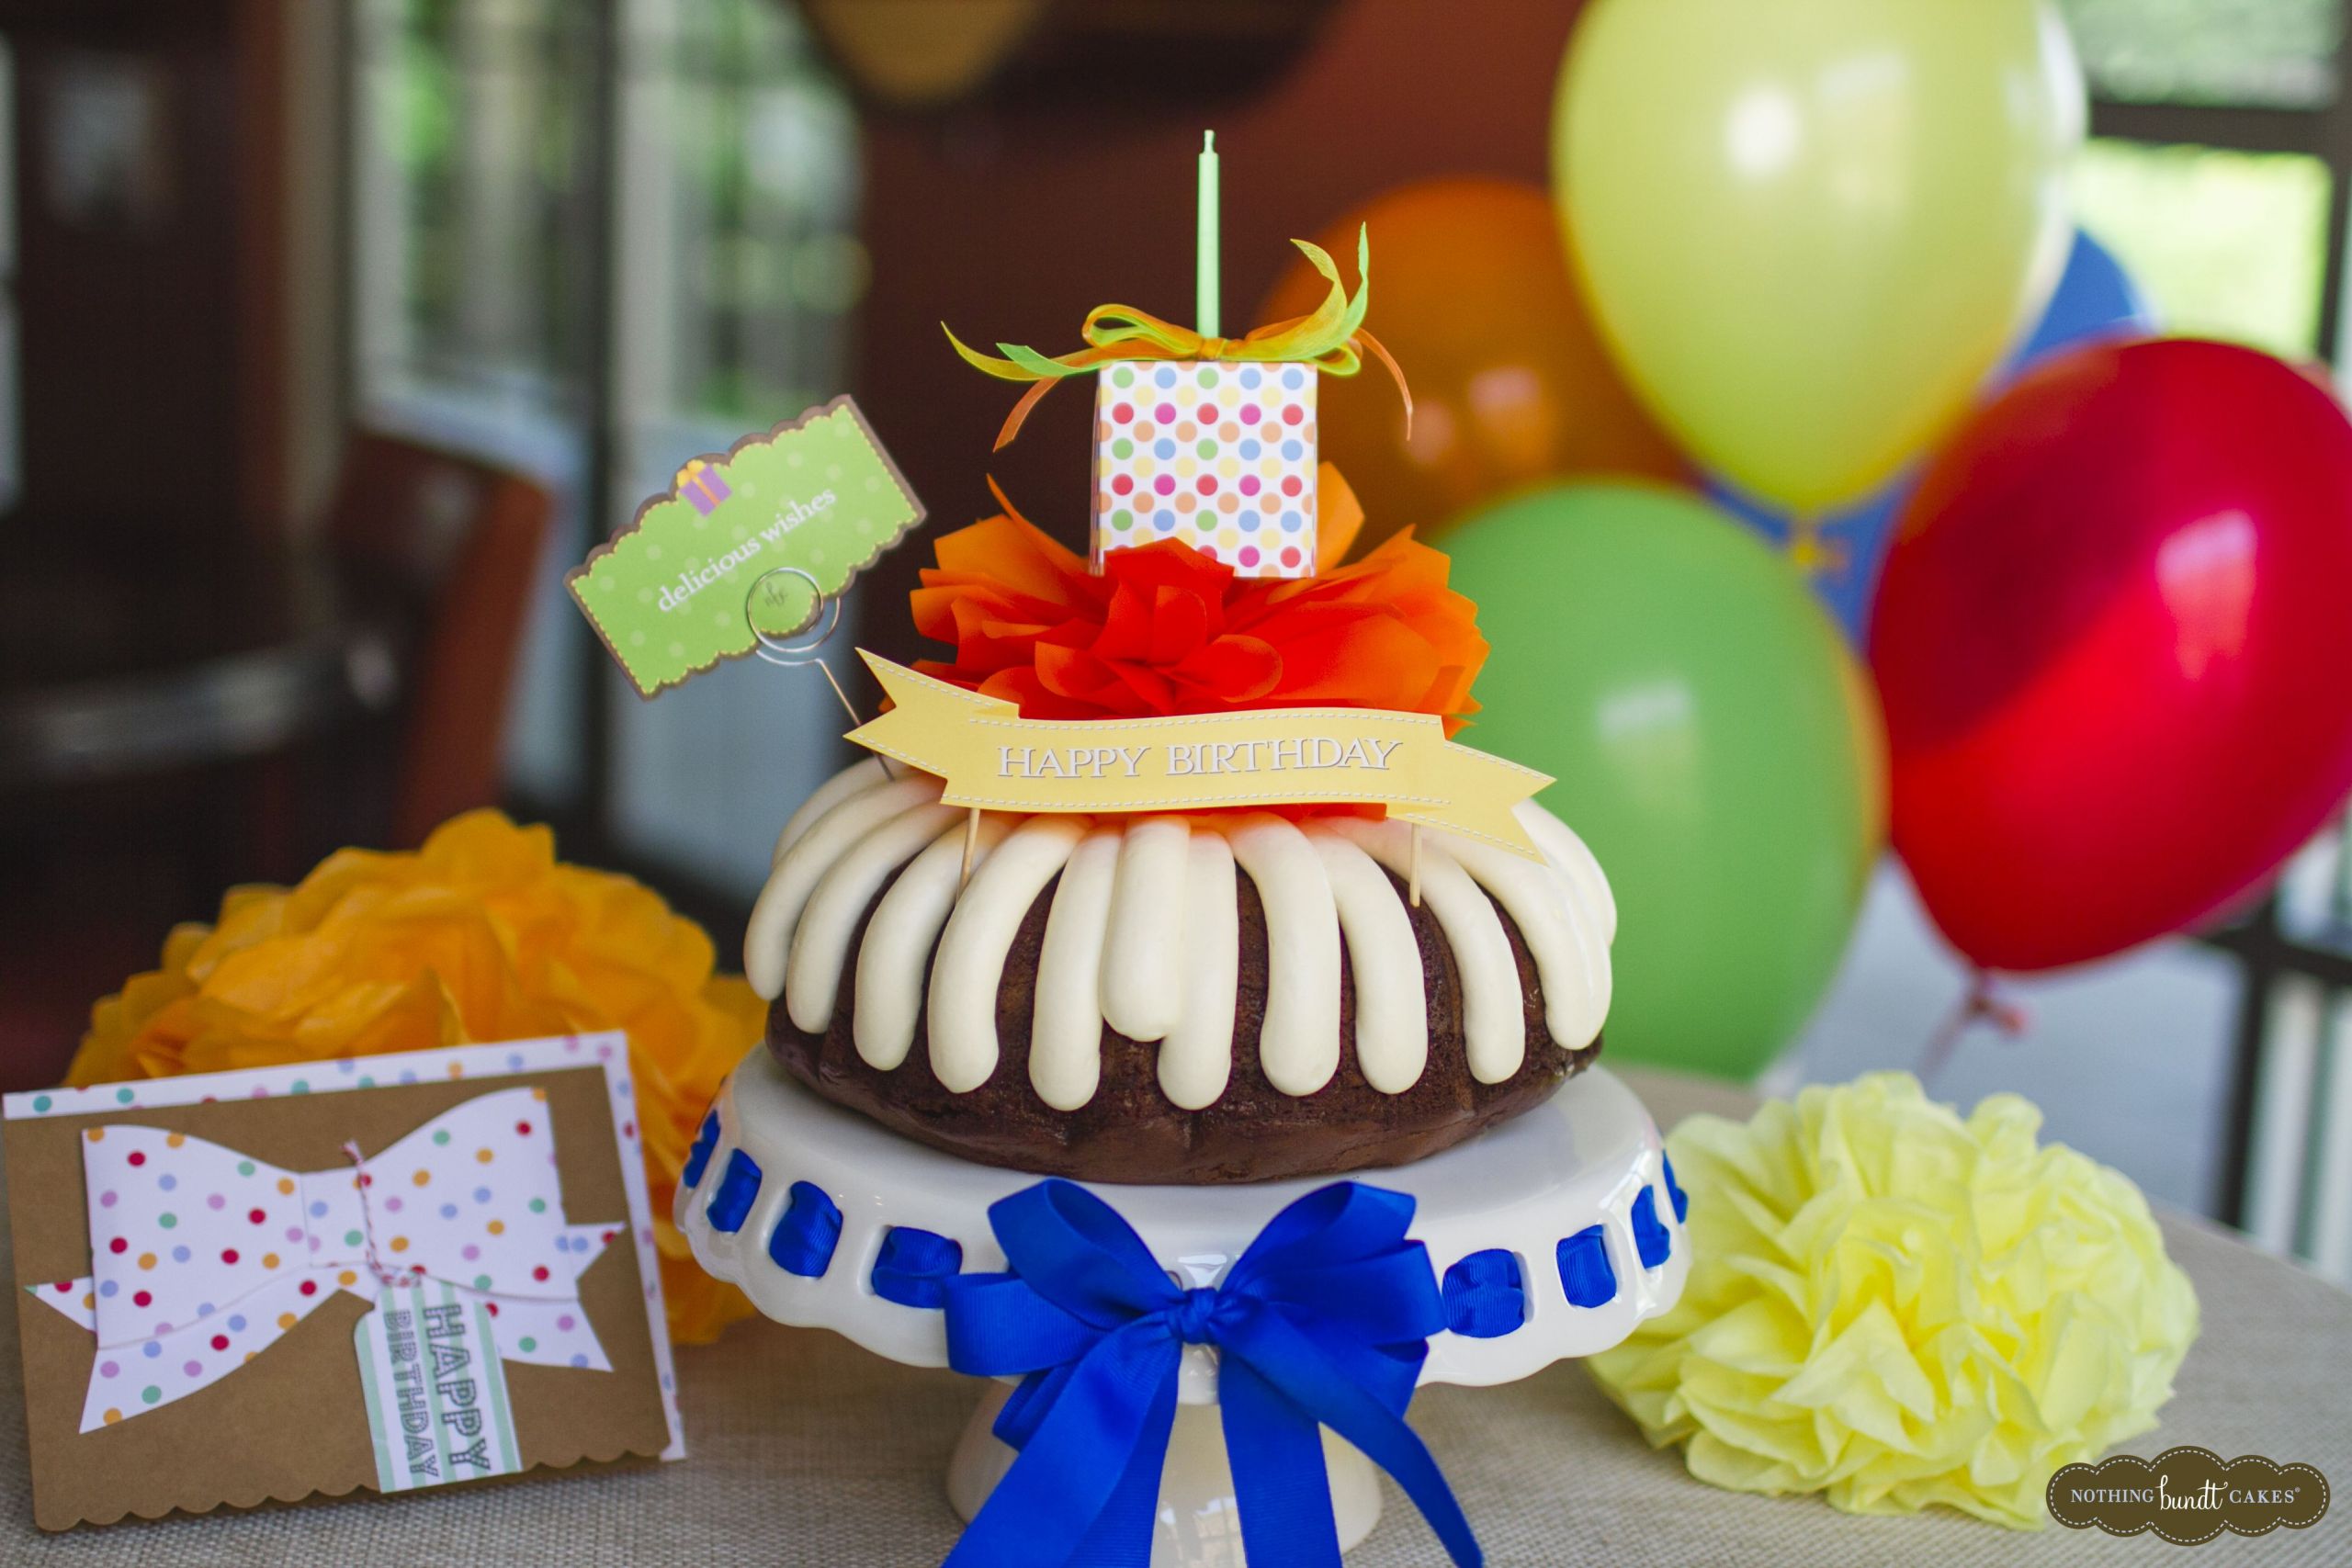 Nothing Bundt Cakes Birthday
 Nothing Bundt Cakes makes all of your delicious birthday